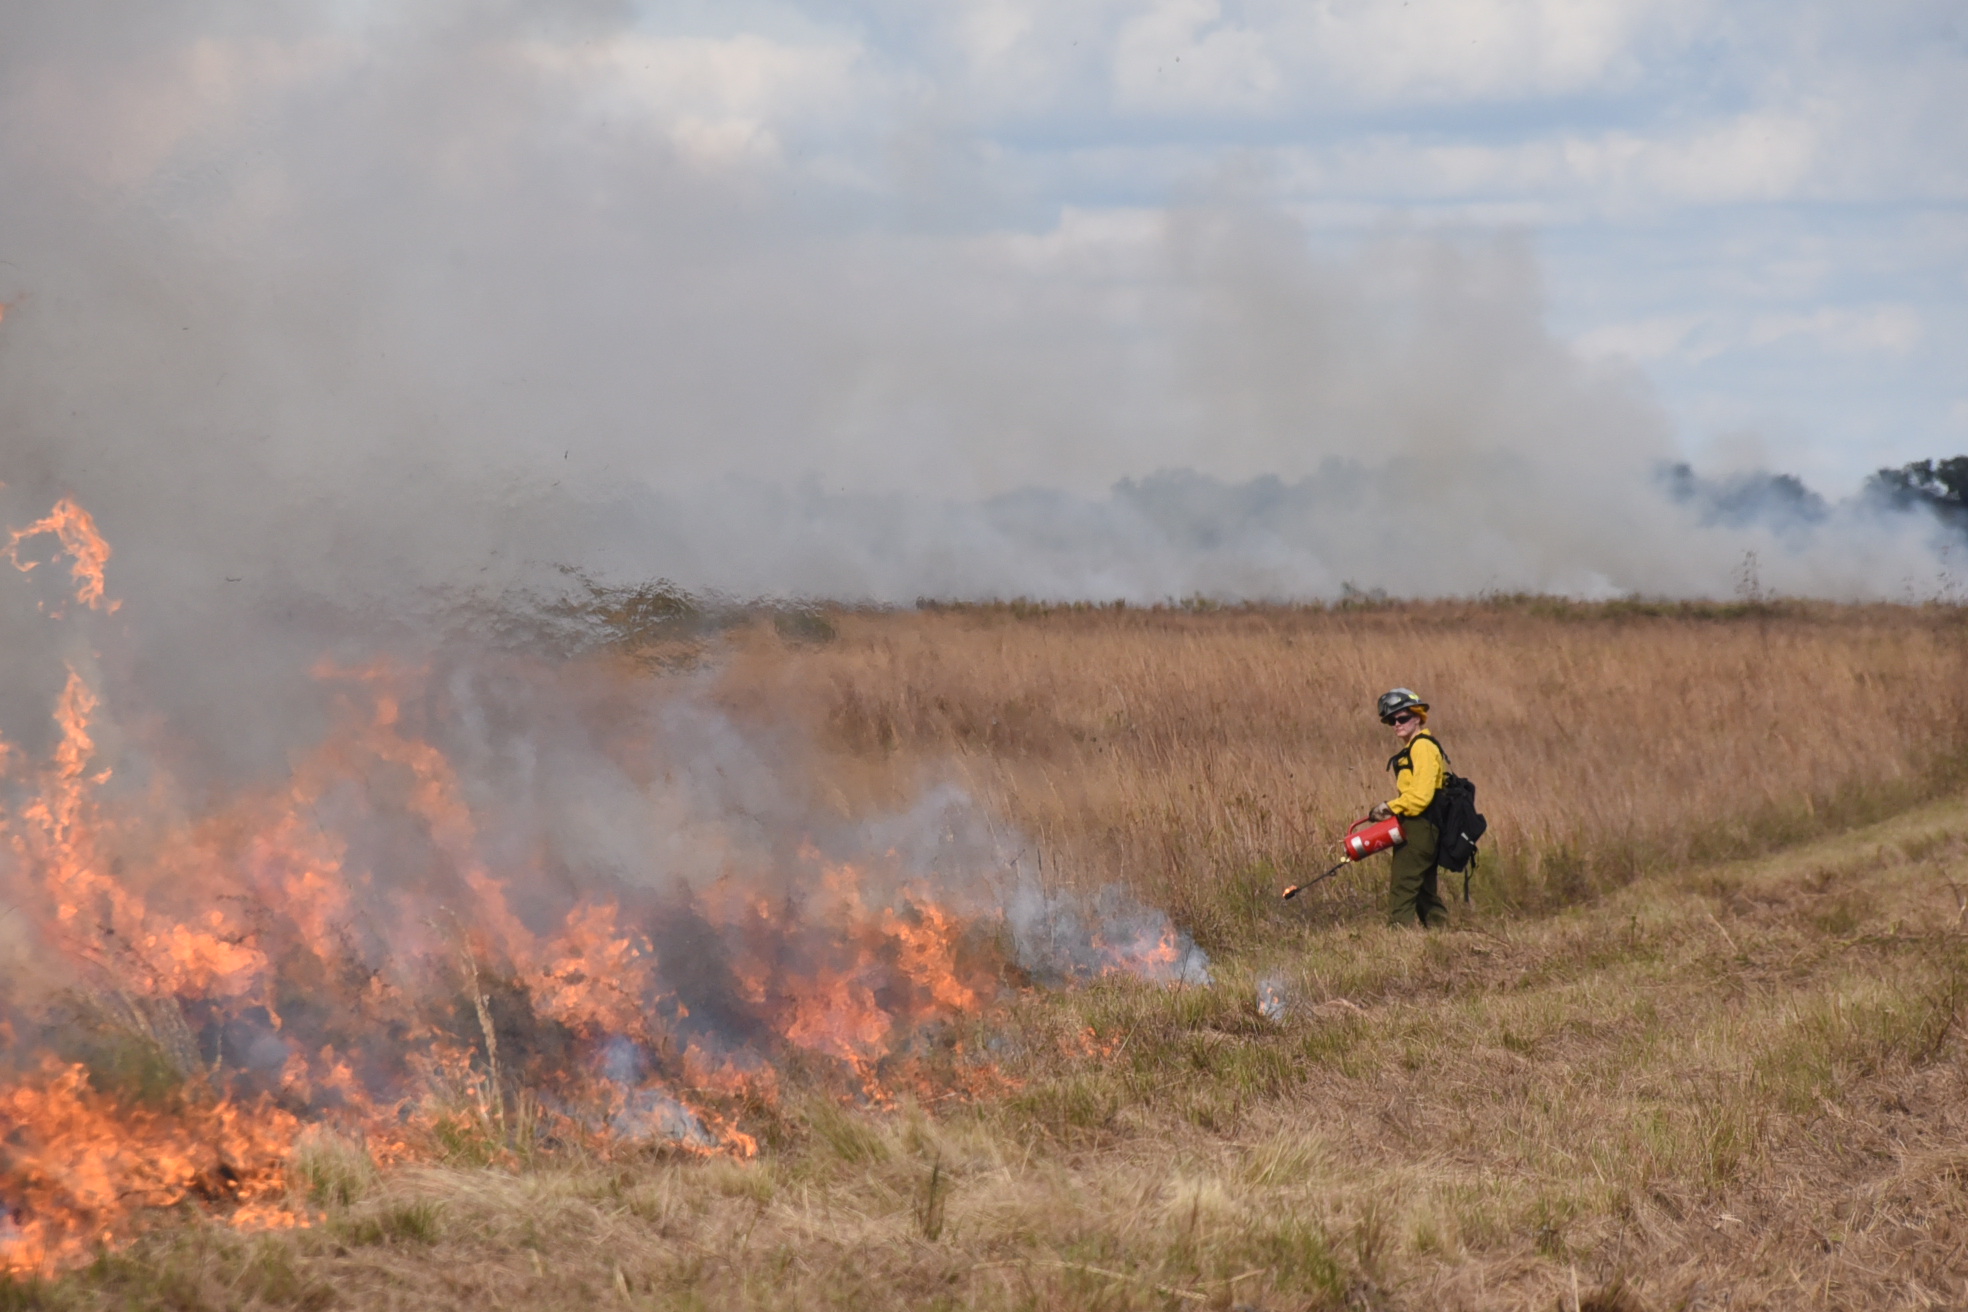 Fire burns prairie grasses as one of the crew carries a fuel torch to light. Smoke shrouds the horizon.